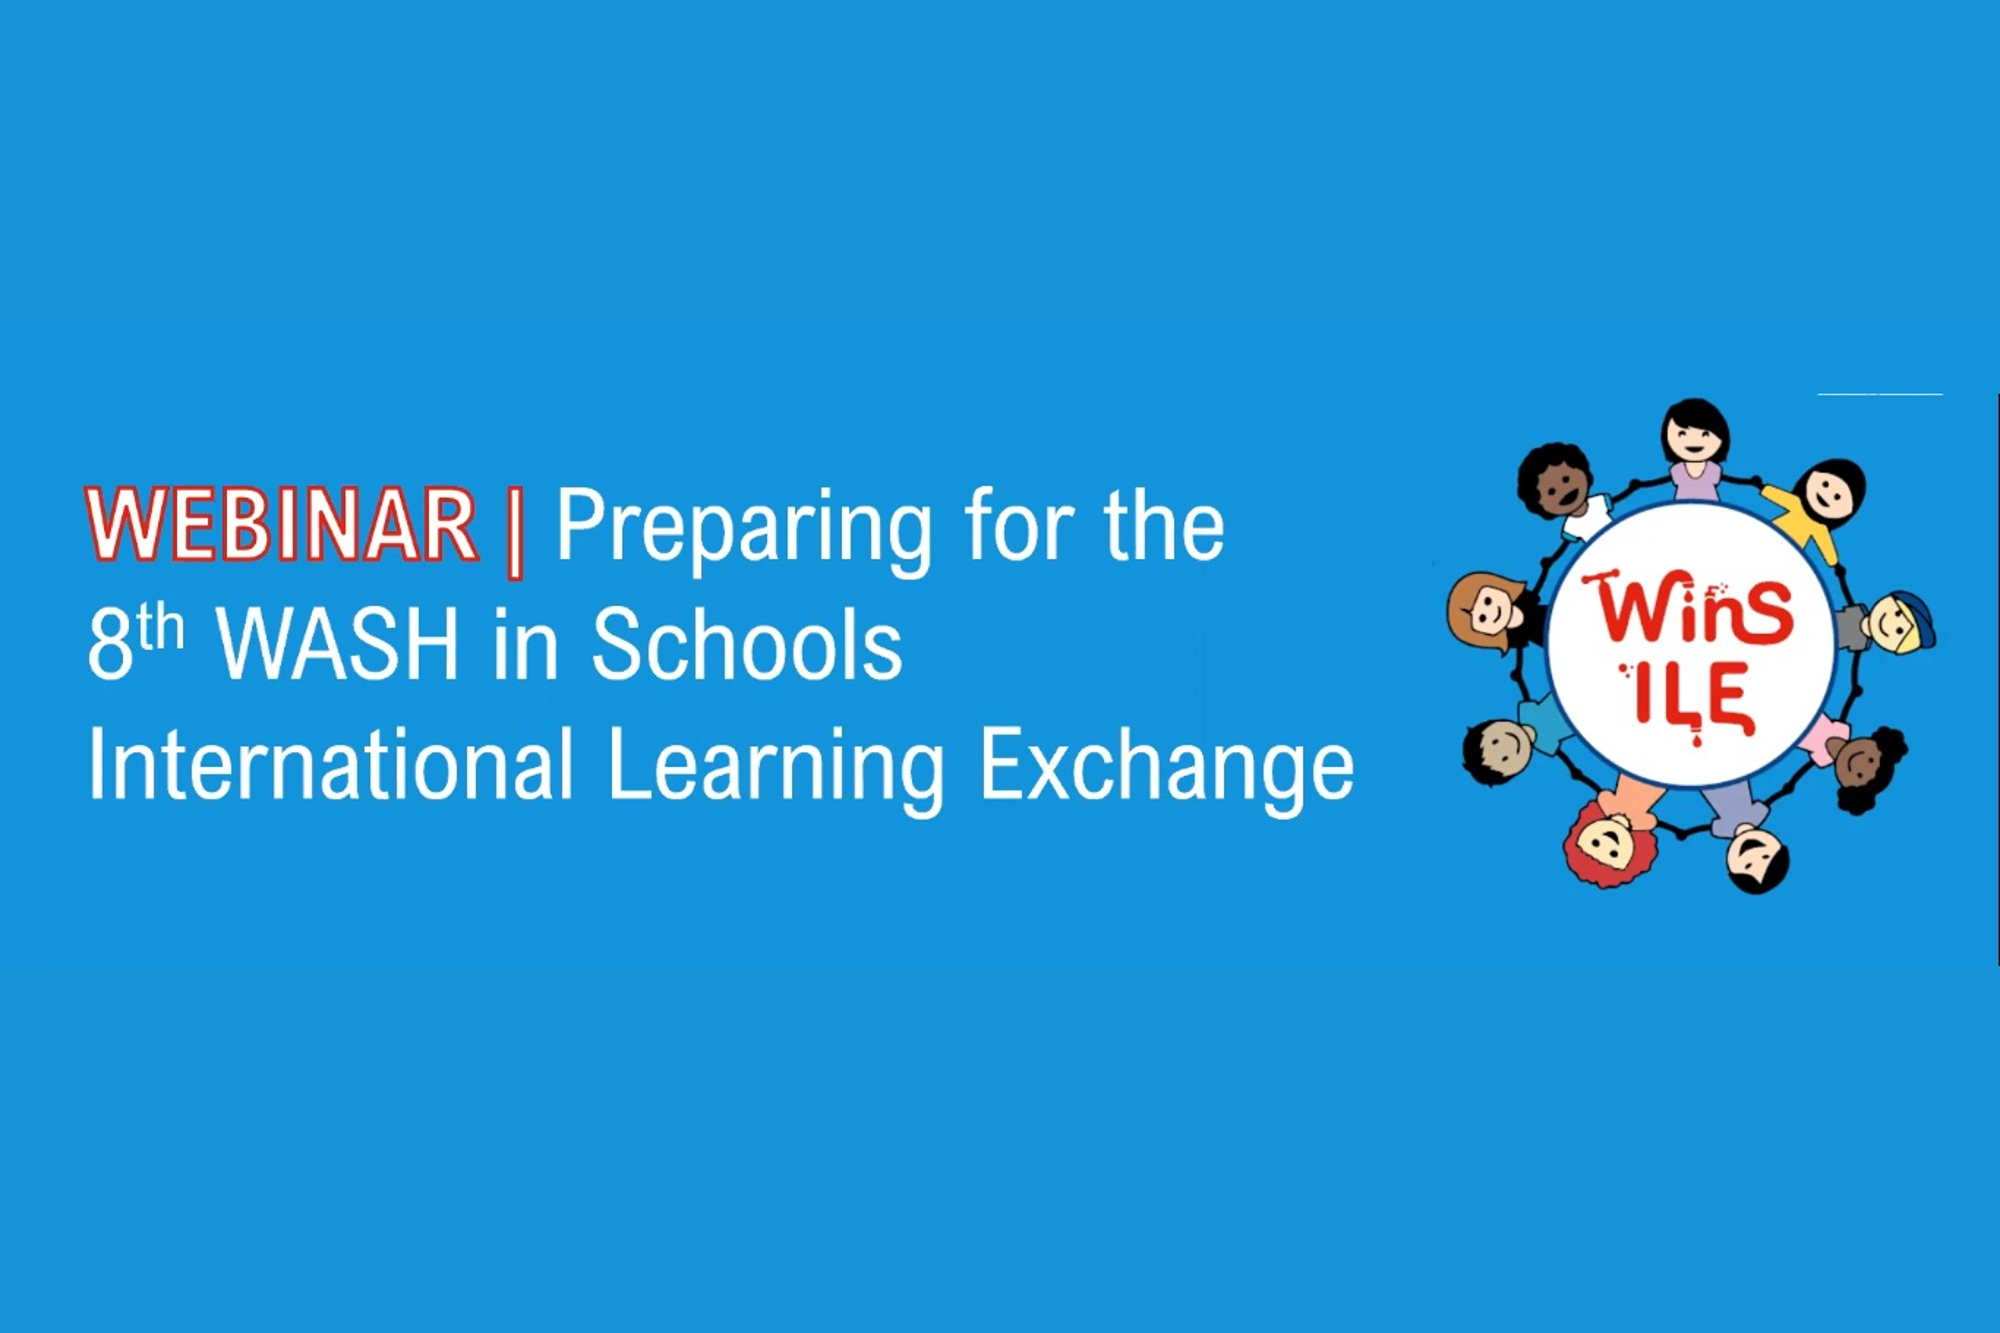 Preparing for the 8th WASH in Schools International Learning Exchange